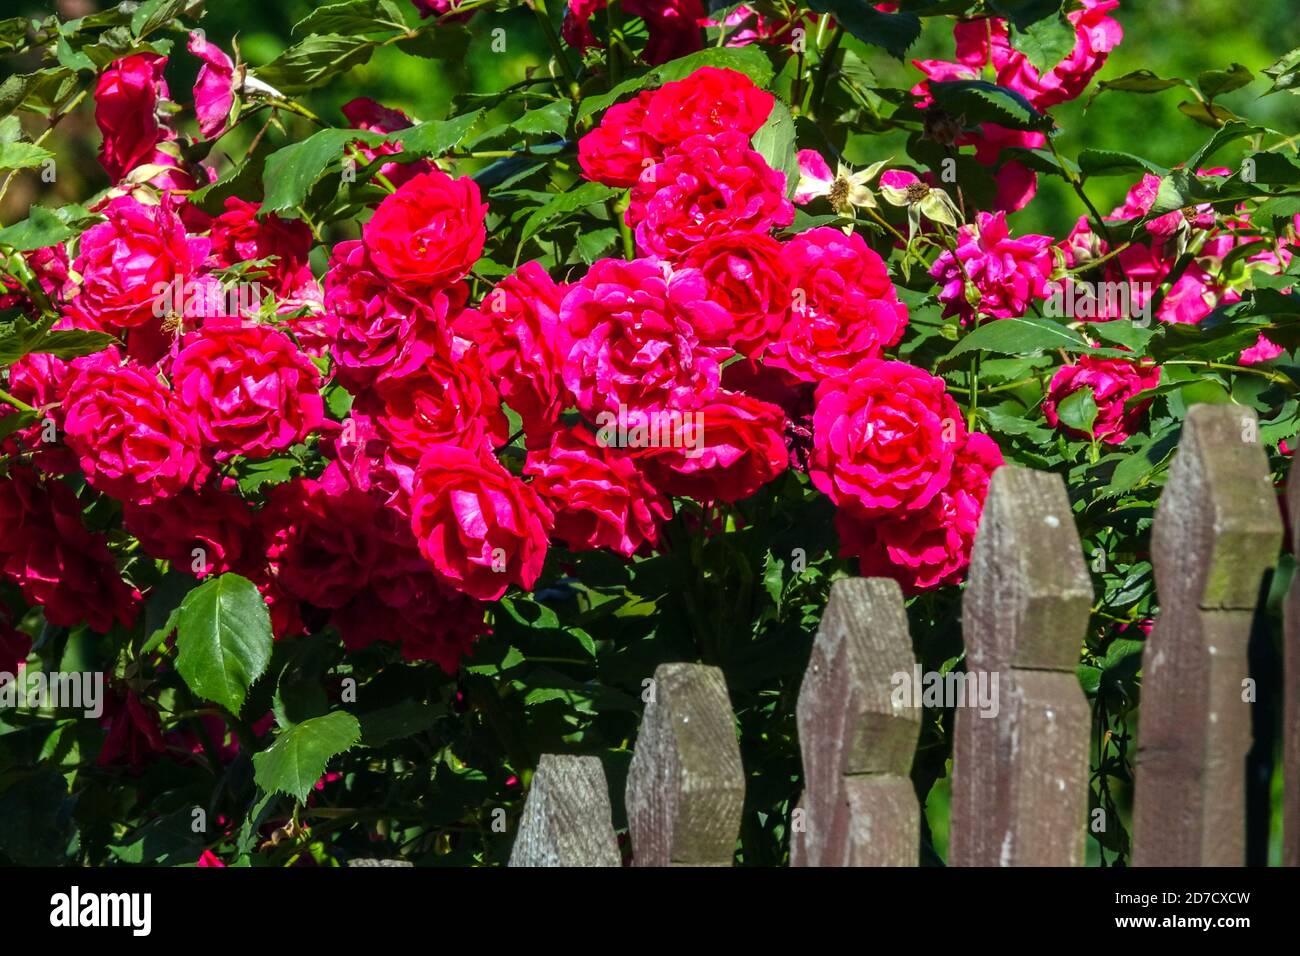 Red rose dlowers garden fence Stock Photo